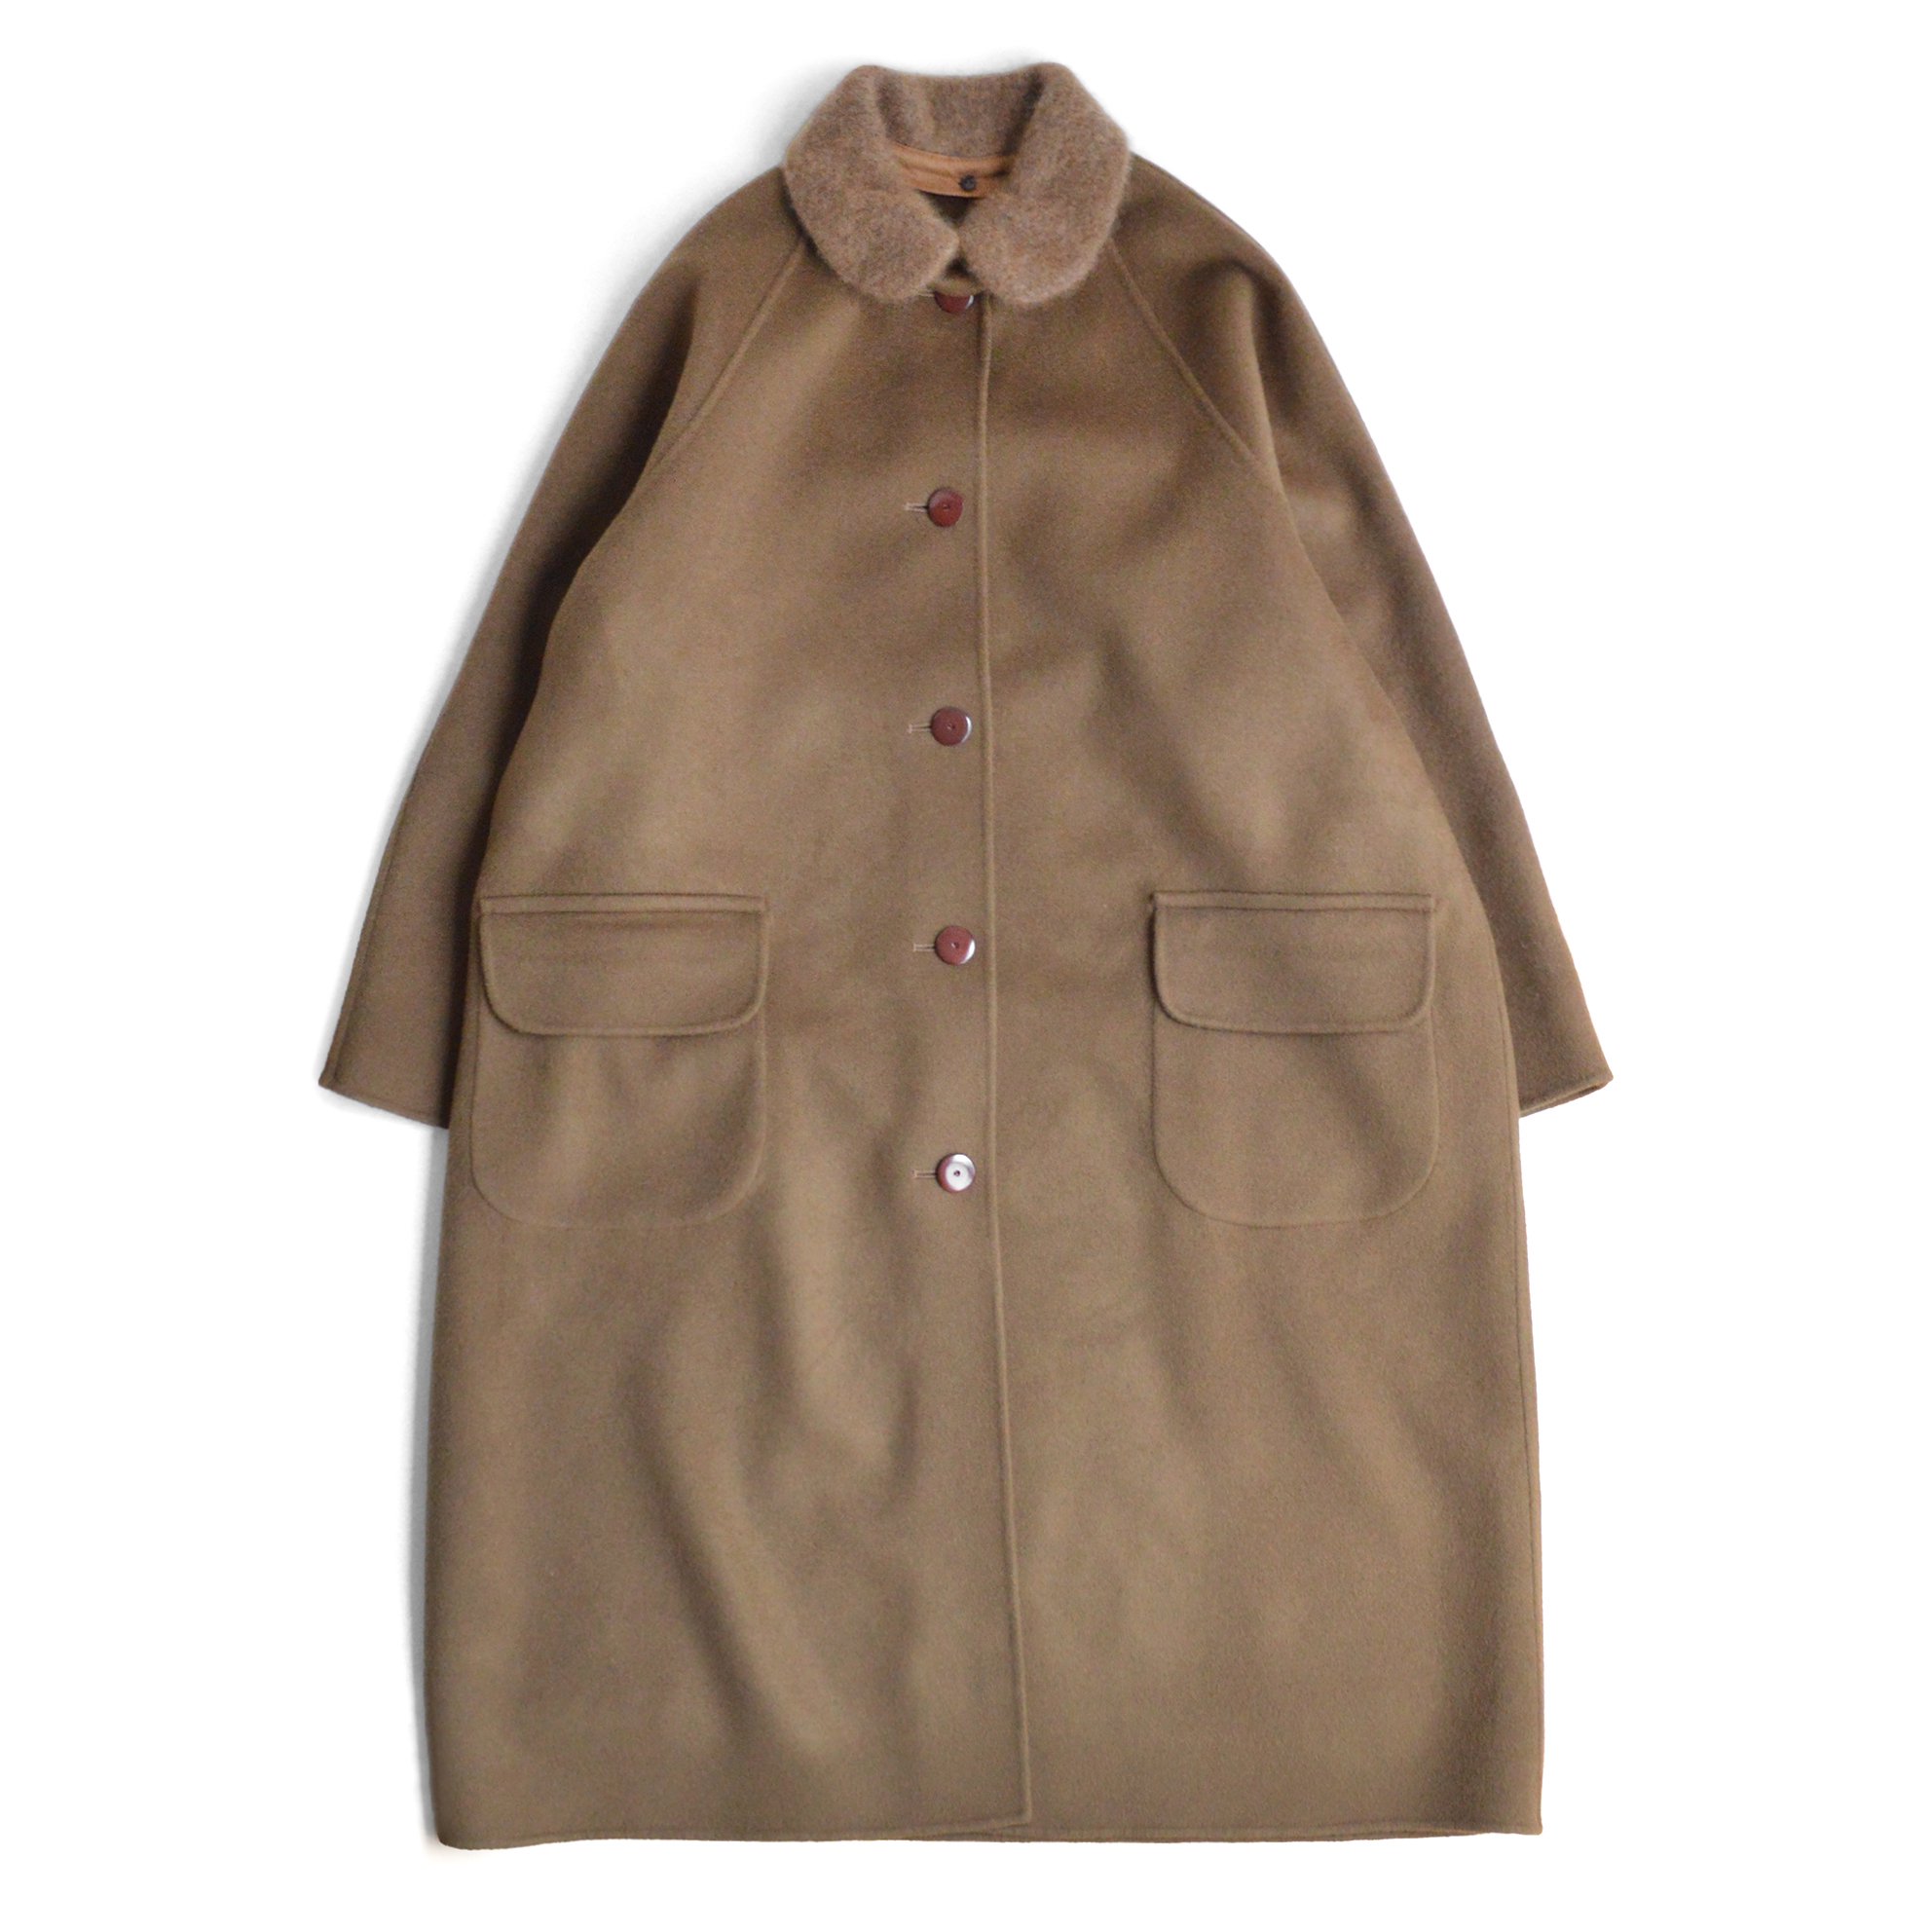 ARTS & SCIENCE / Attached collar coat【No.0233L11713325】 - くるみの木